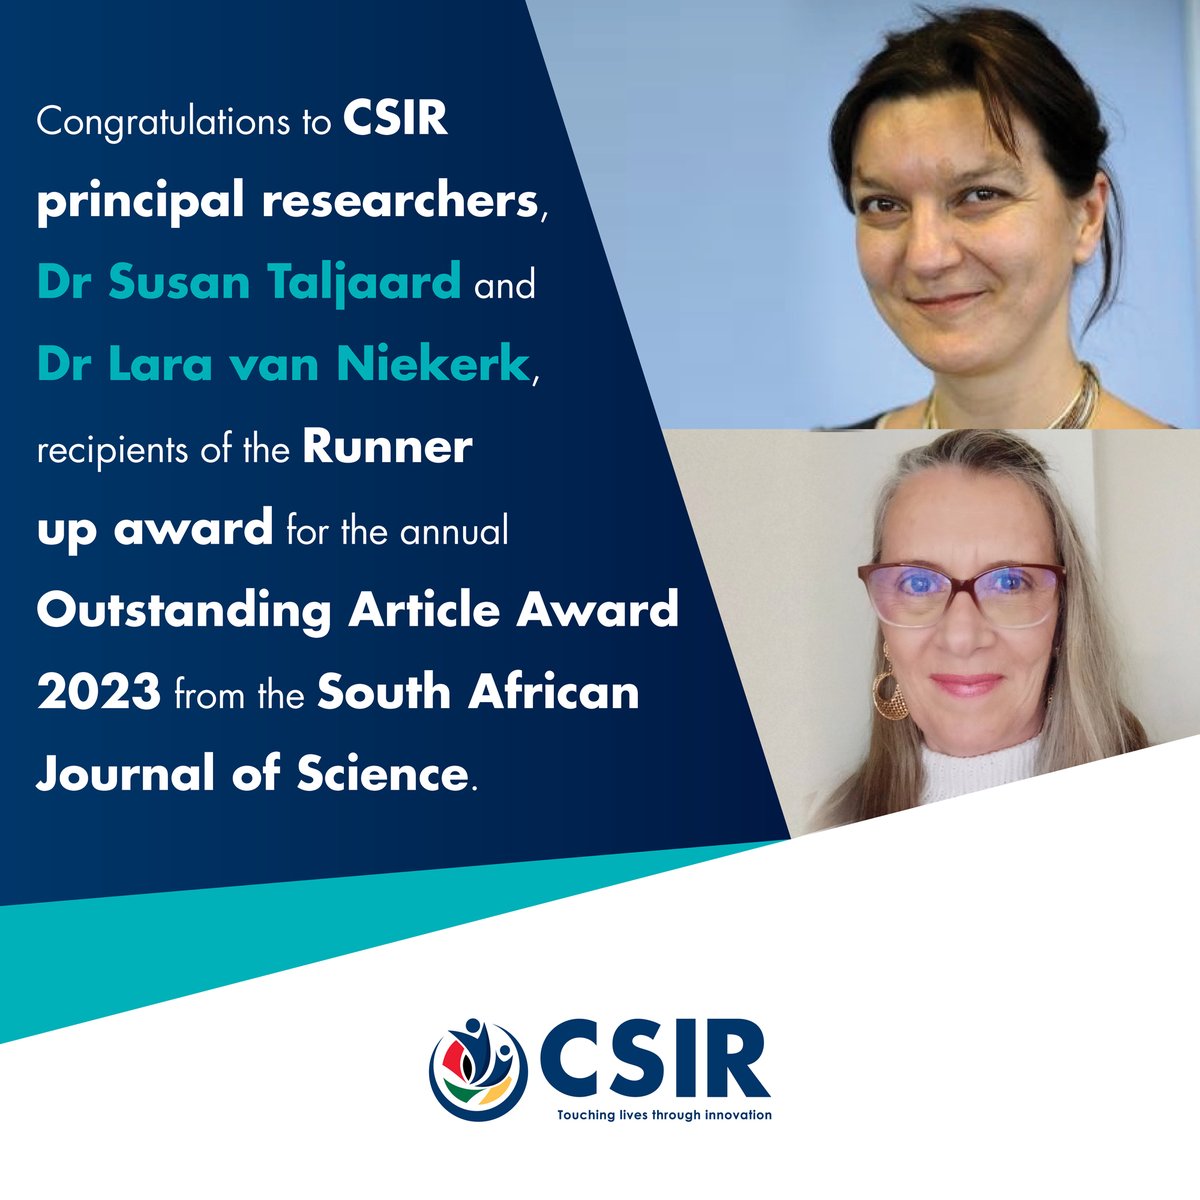 1/2 Congrats #TeamCSIR principal researchers Drs Taljaard & van Niekerk for their published paper, 'Advancing ecosystem accounting in estuaries: Swartkops Estuary case study'. The duo, together with Dr Ridden & Prof Adams from NMU, are recipients of the Runner-up award for...